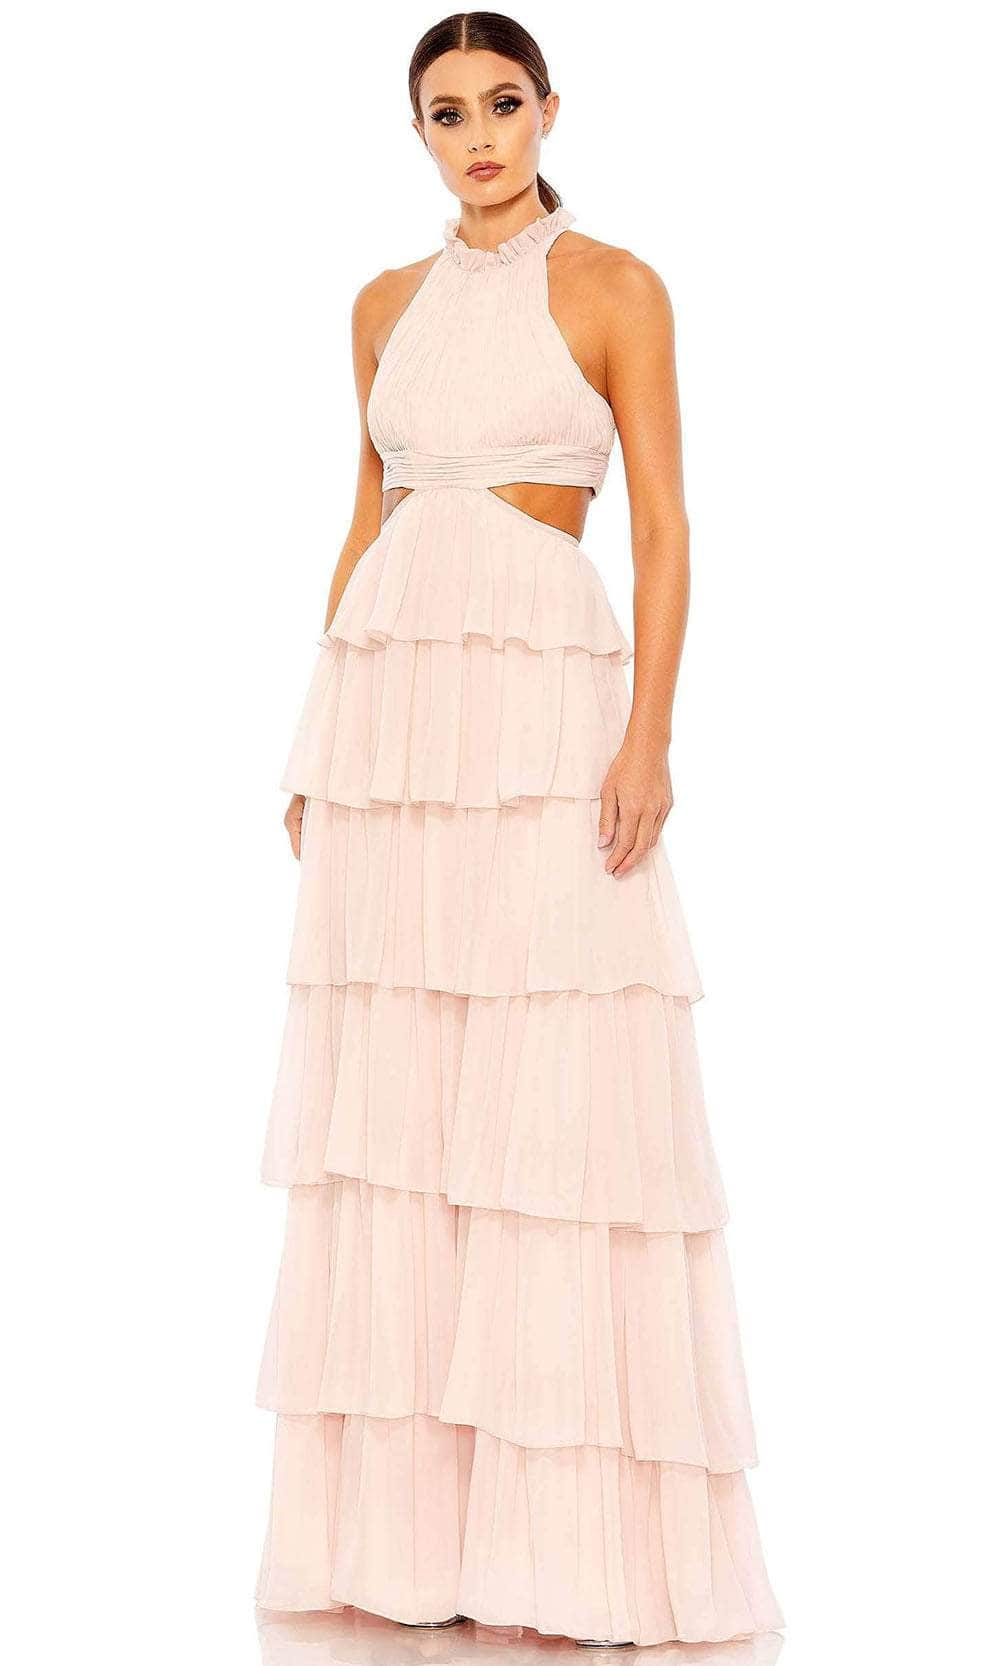 Ieena Duggal 55817 - High Neck Tiered Prom Dress Special Occasion Dress 0 / Blush